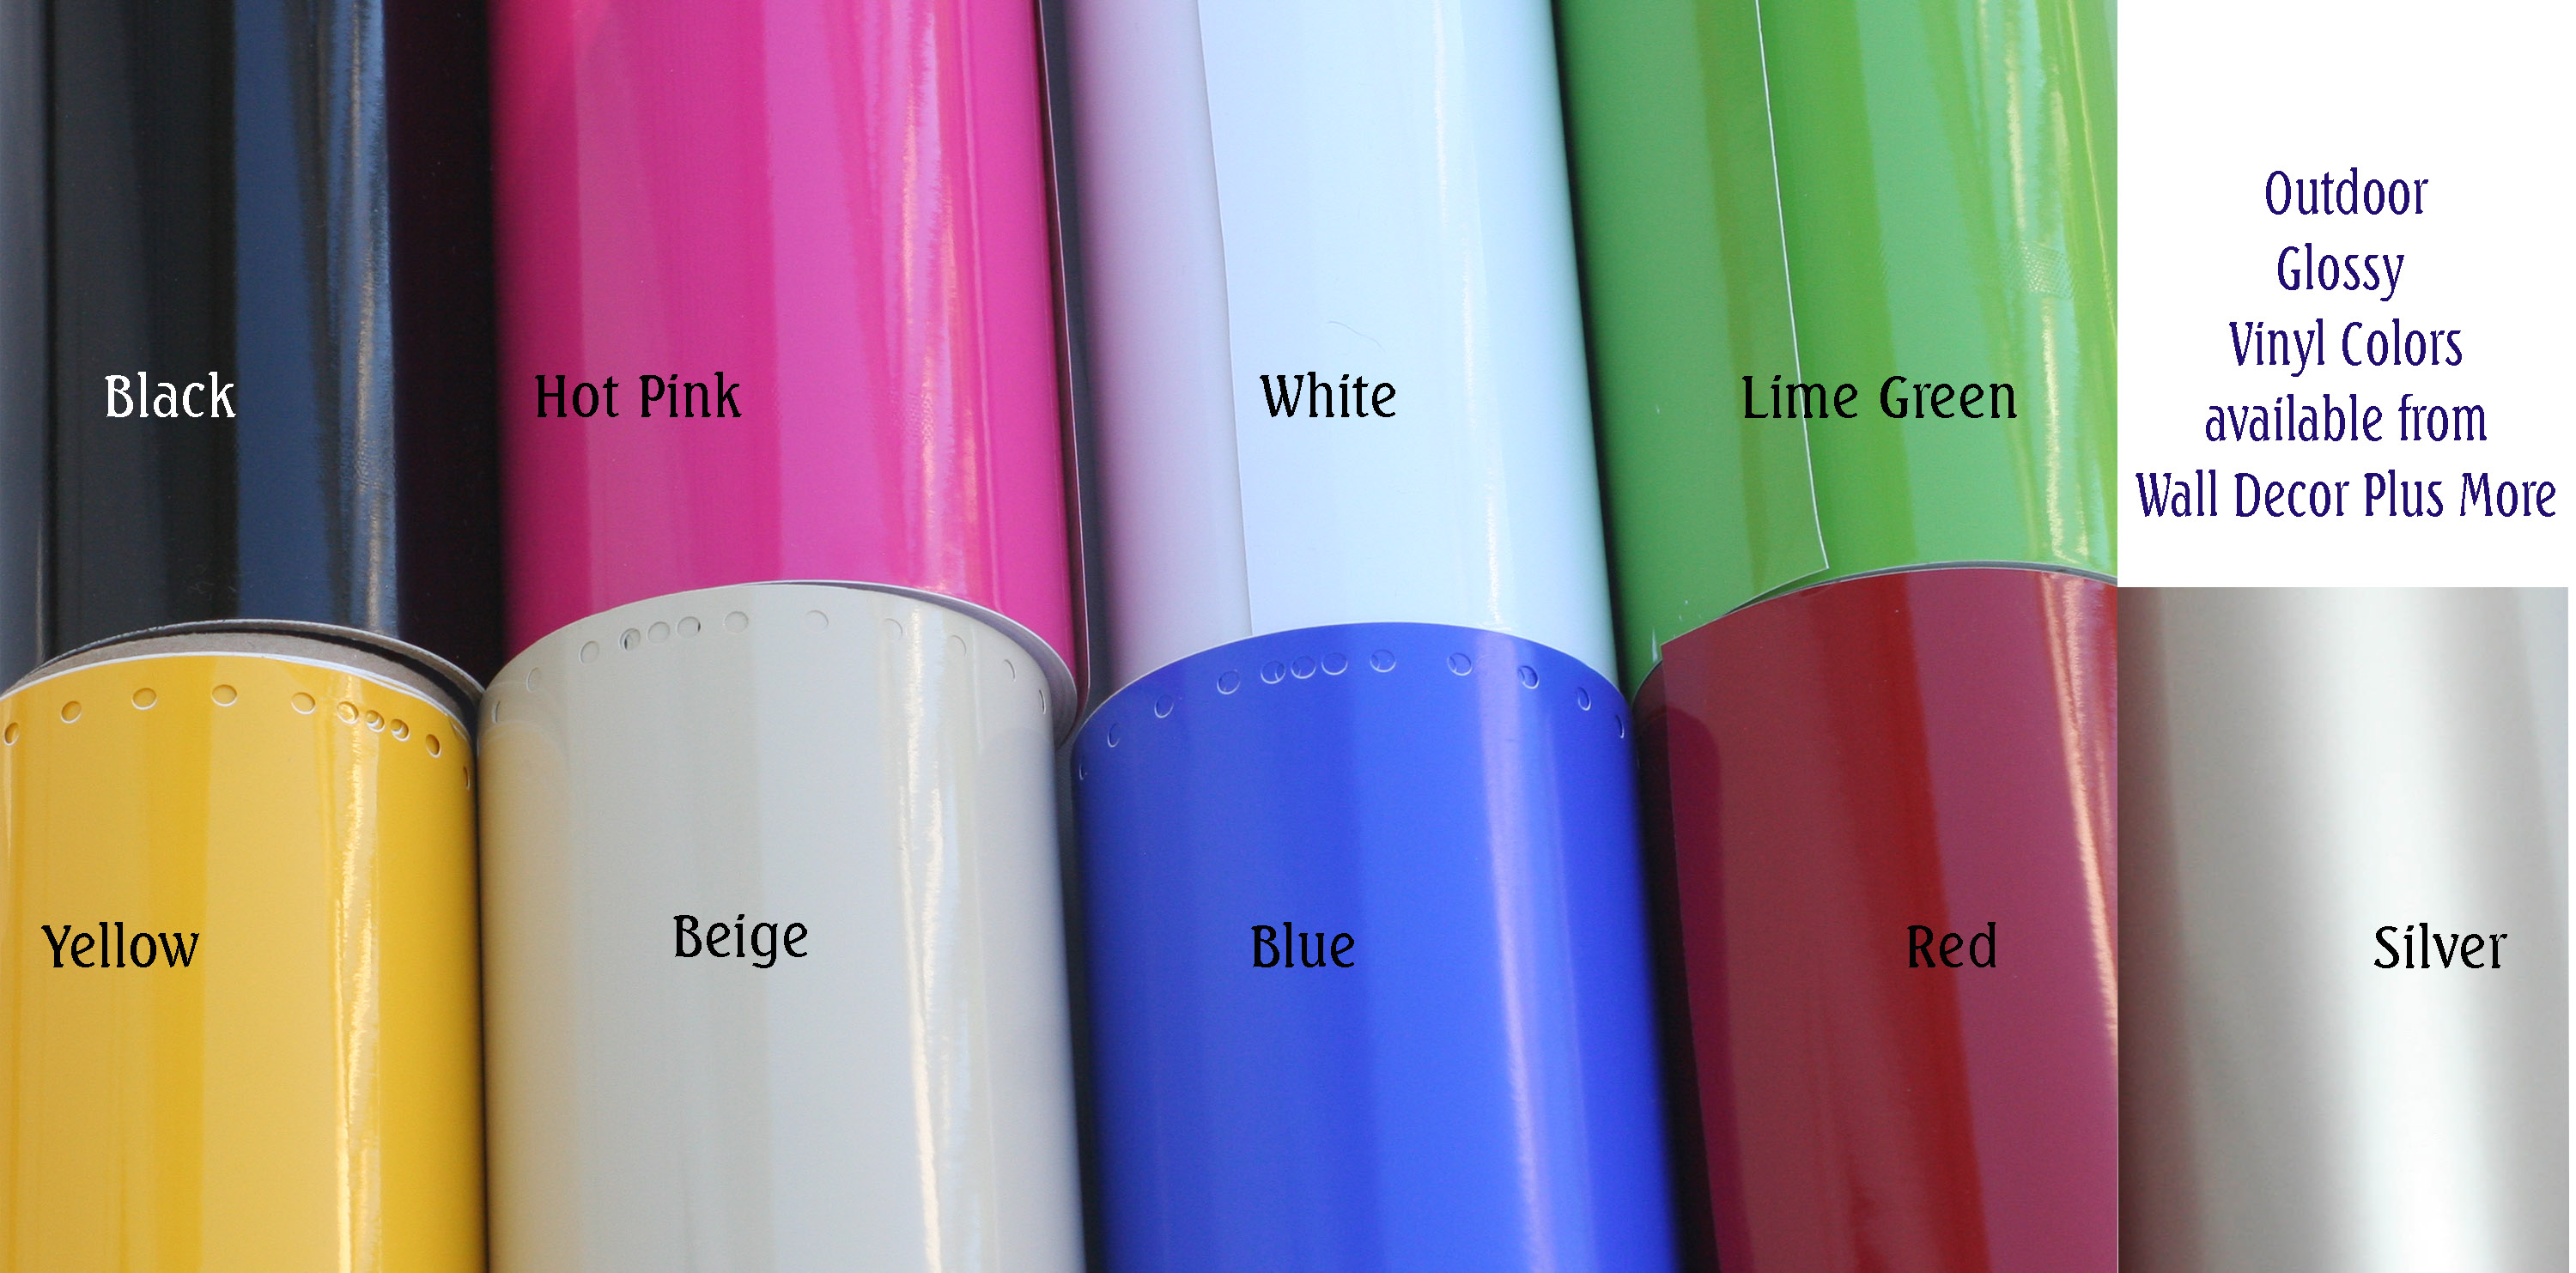 Choosing the Right Color For Your Mailbox Decal - Wall Decor Plus More